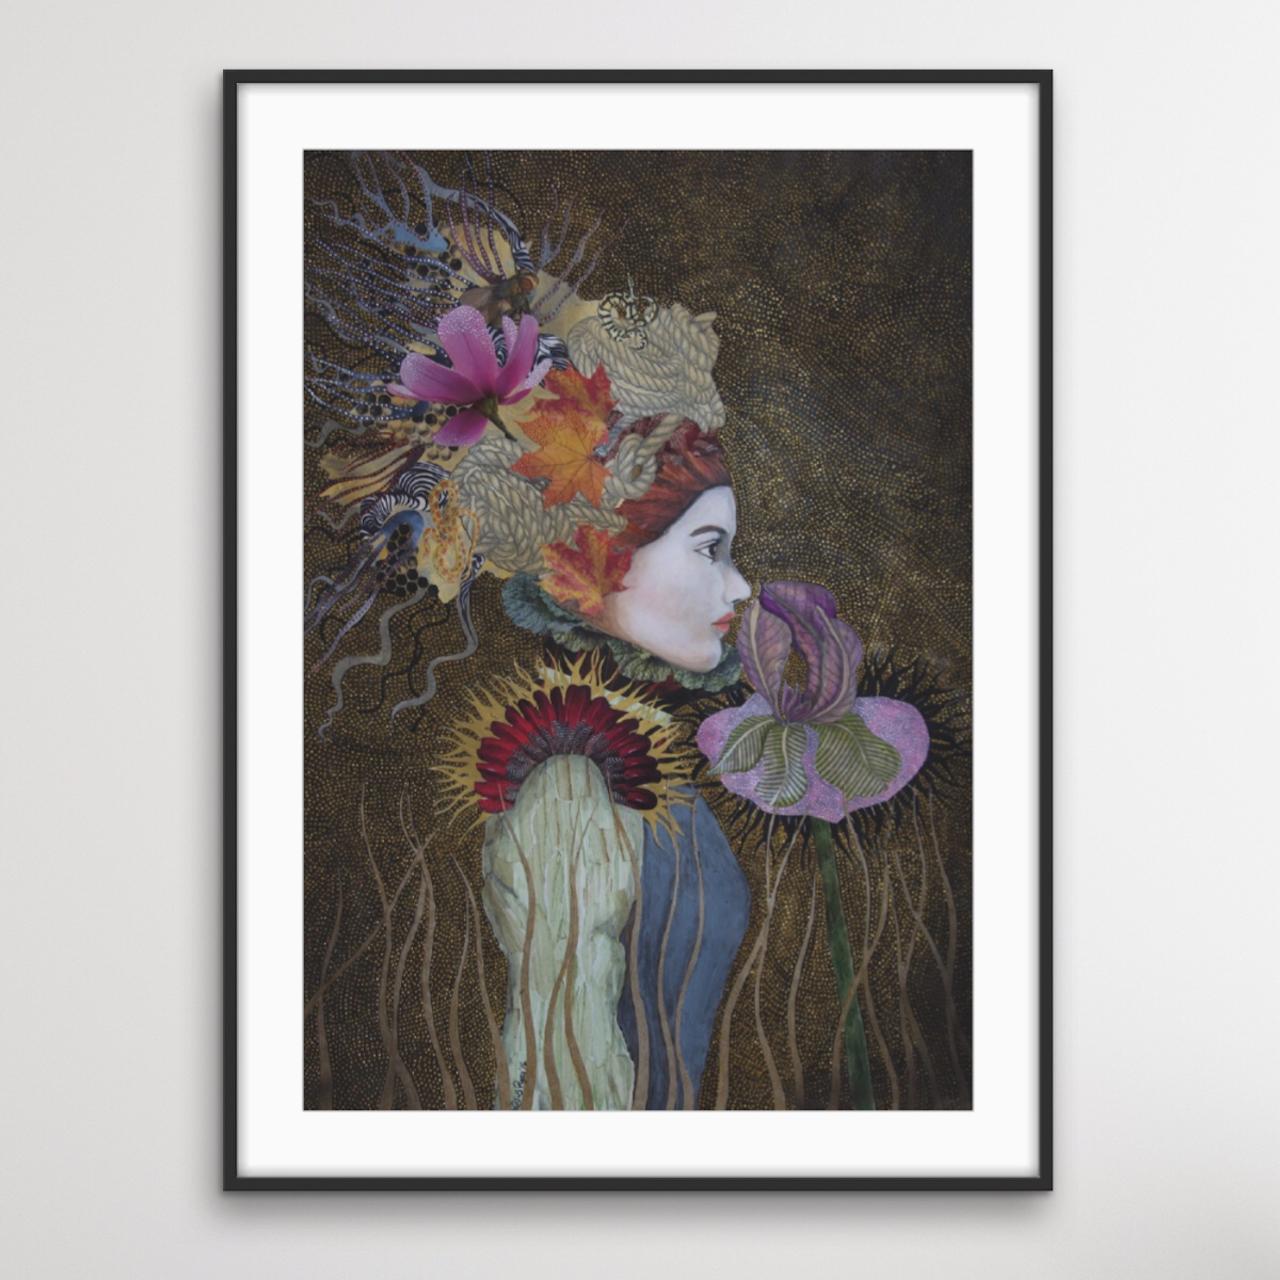 The Smell of Forgotten Things, Limited Edition Female Portrait, Contemporary Art - Black Figurative Print by Sabina Pieper